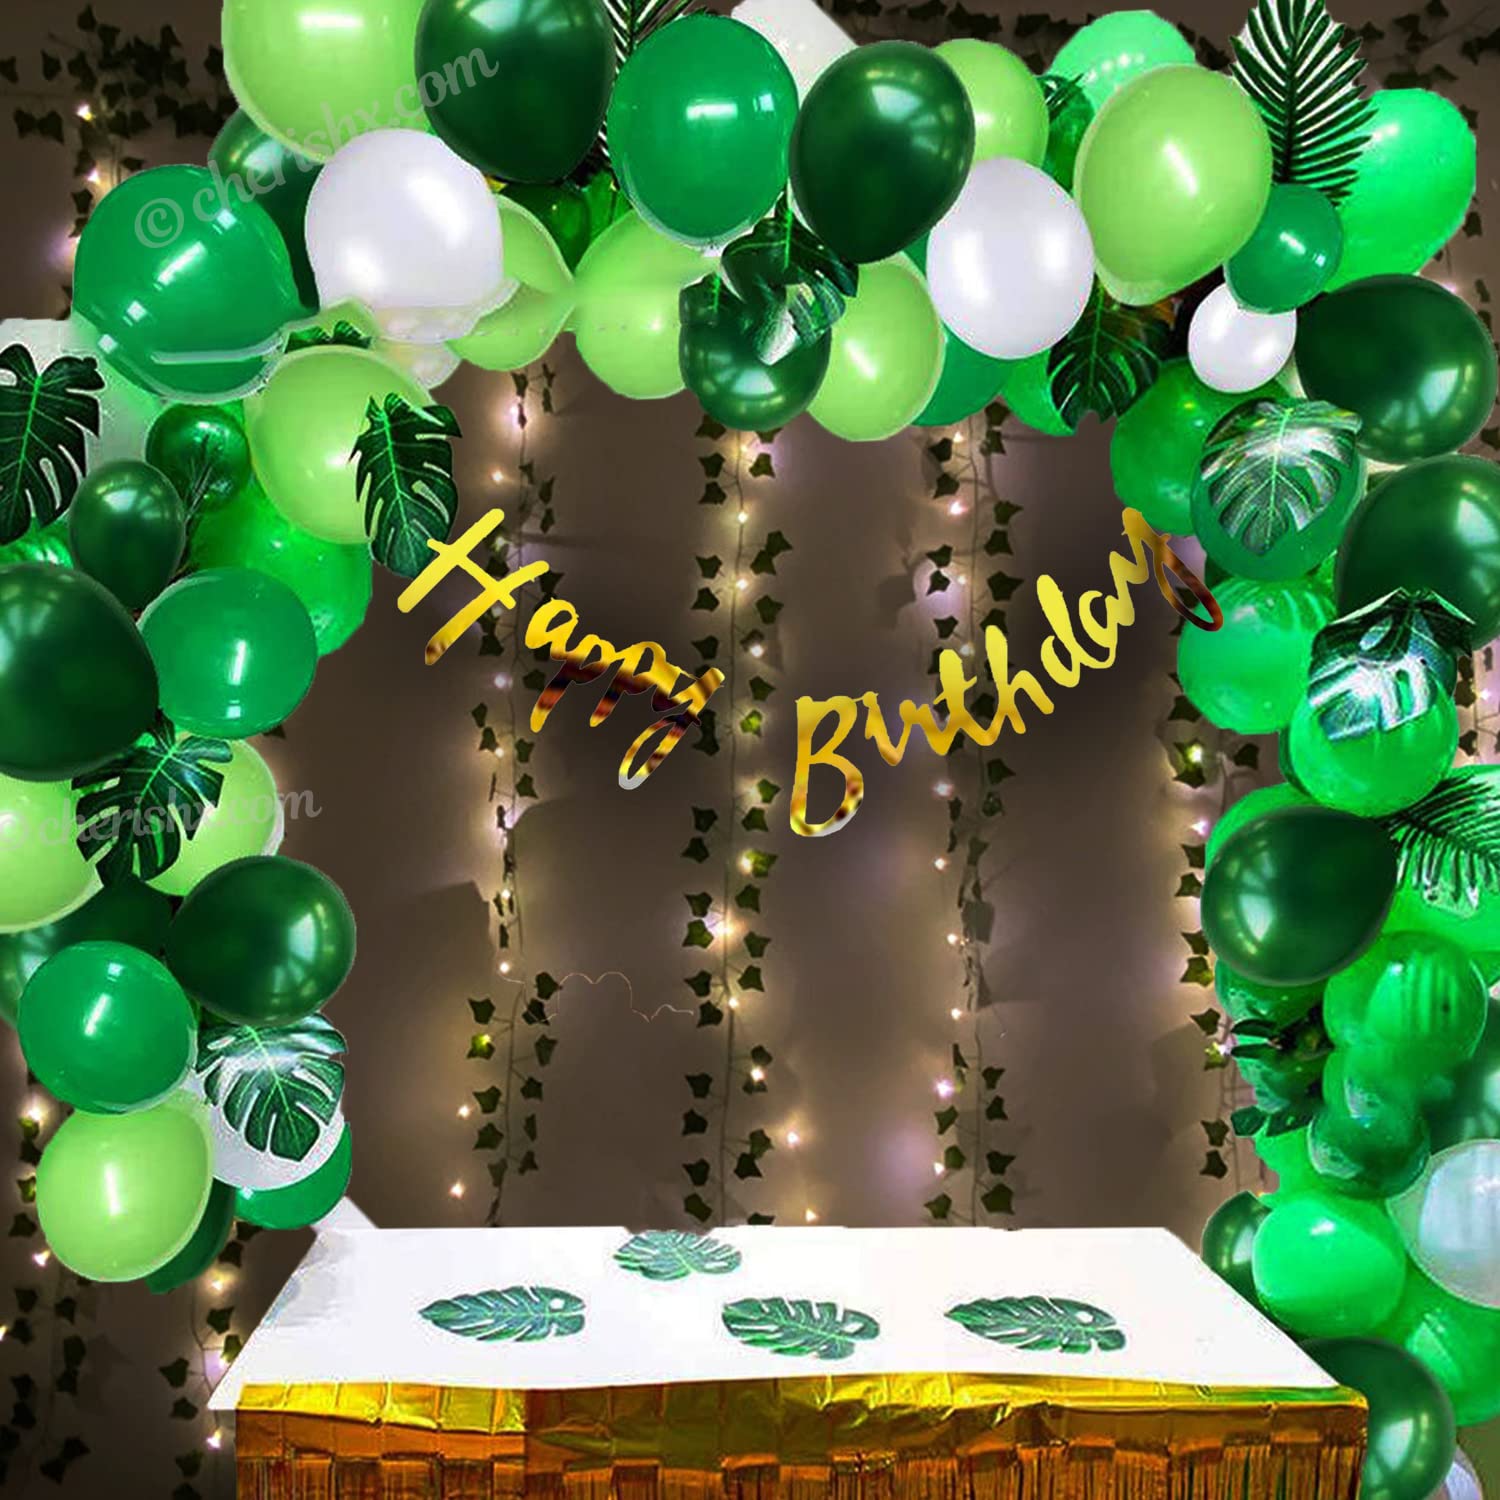 Jungle Theme Party Decoration Items for Kids Birthday - Pack of 55 Pcs - Bunting, Artificial Leaf, Latex Balloons, Arch tape - Decorating Items Birthday Party for Boy or Girl freeshipping - CherishX Partystore